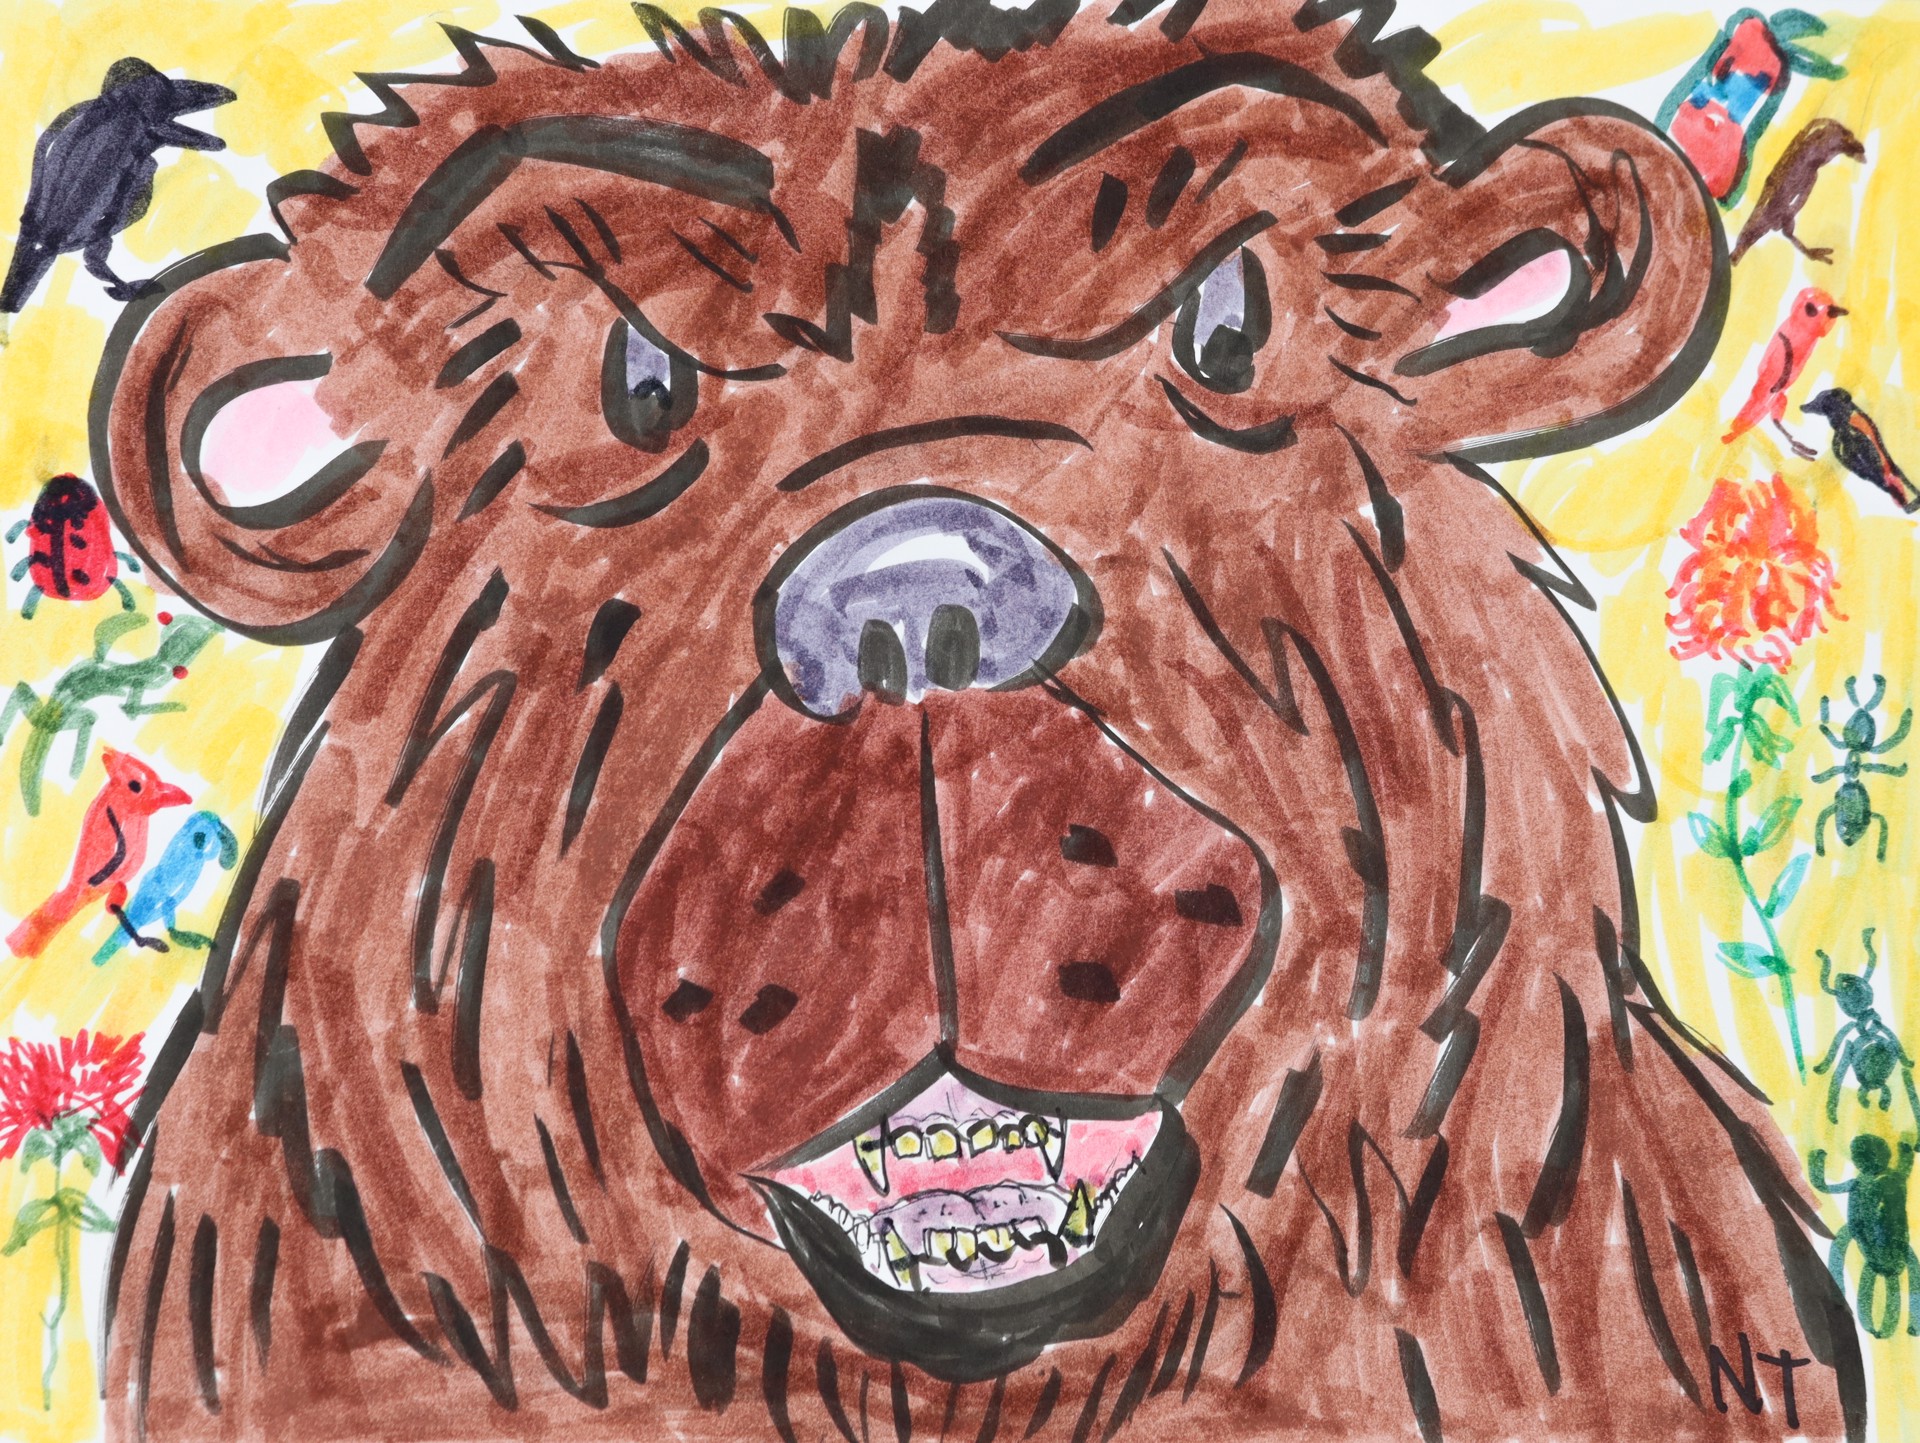 A Nice Grizzly Bear of Hopes and Dreams by Nonja Tiller